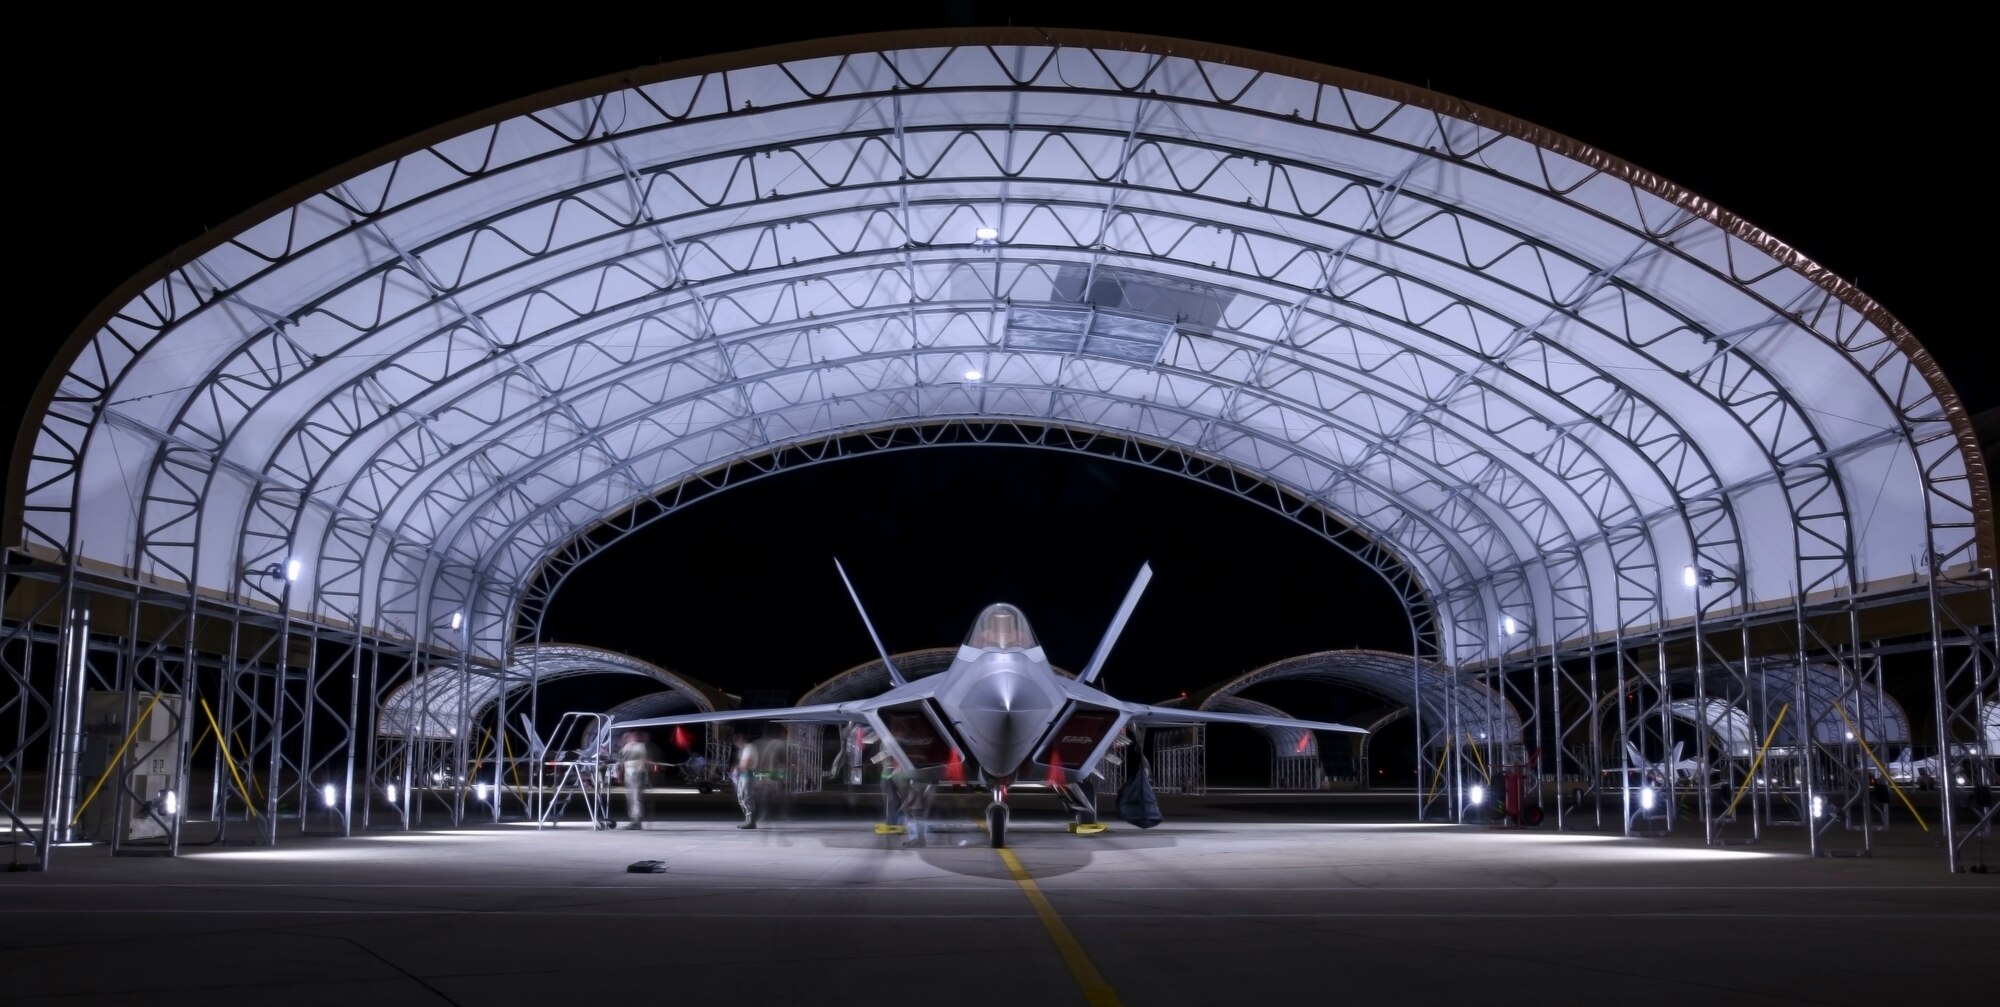 U.S. Air Force Airmen assigned to the 94th Aircraft Maintenance Unit and the 27th Fighter Wing finish inspecting an F-22 Raptor at Joint Base Langley-Eustis, Va., June 26, 2017. The newly built sun shelters are equipped with lights that illuminate the entire aircraft during hours of darkness, allowing those working under them to have better visualization. (U.S. Air Force photo/Airman 1st Class Tristan Biese)